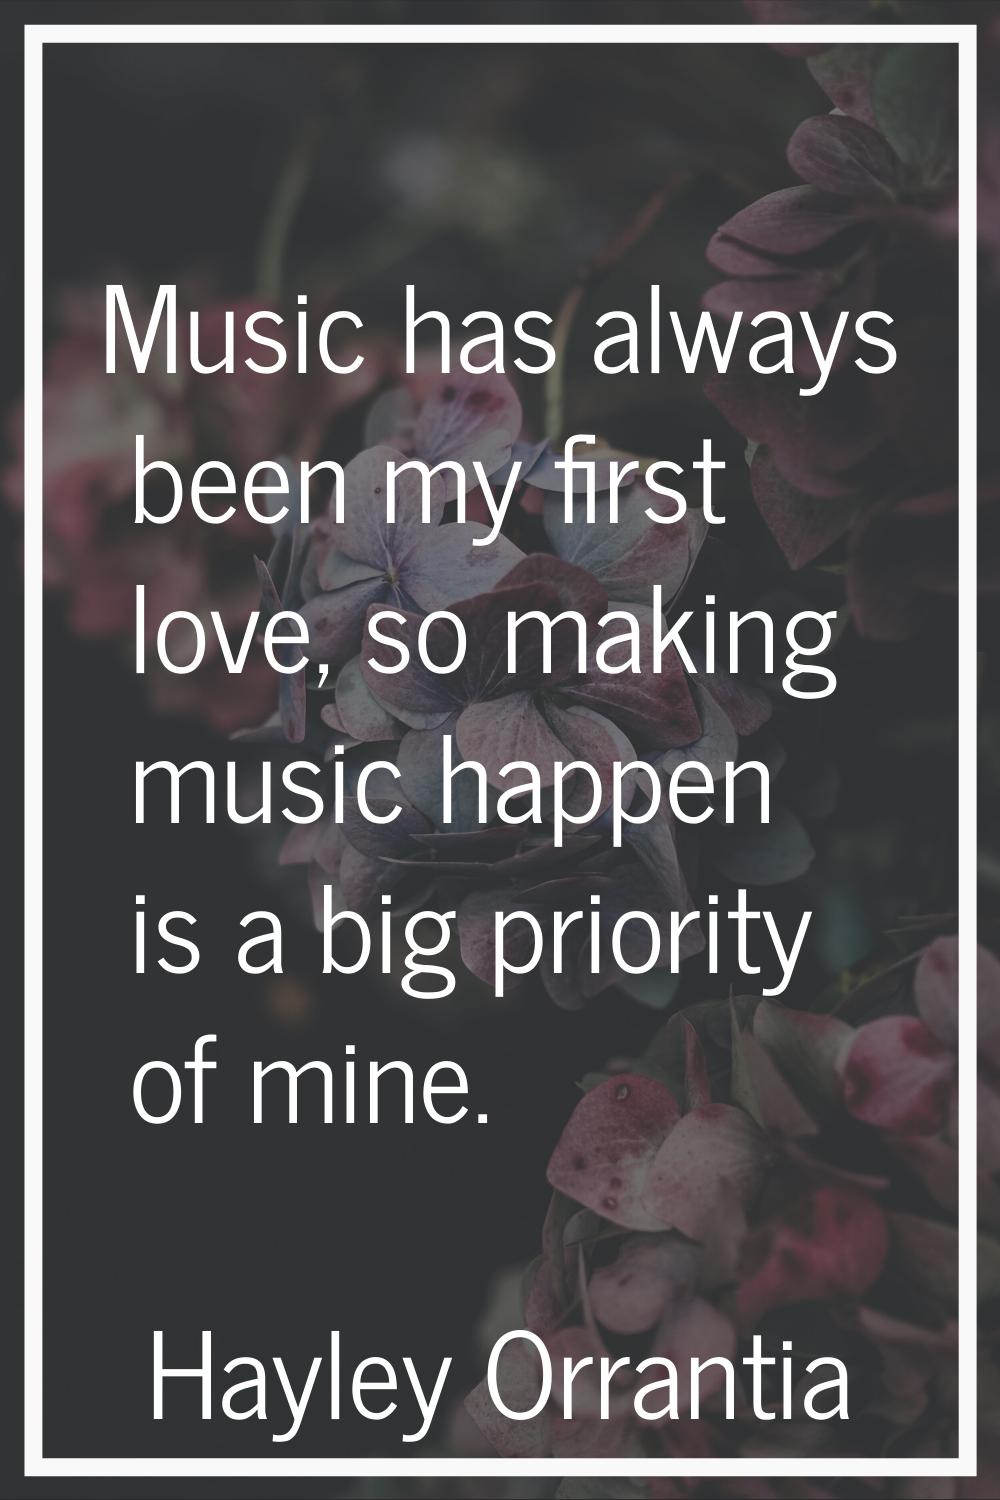 Music has always been my first love, so making music happen is a big priority of mine.